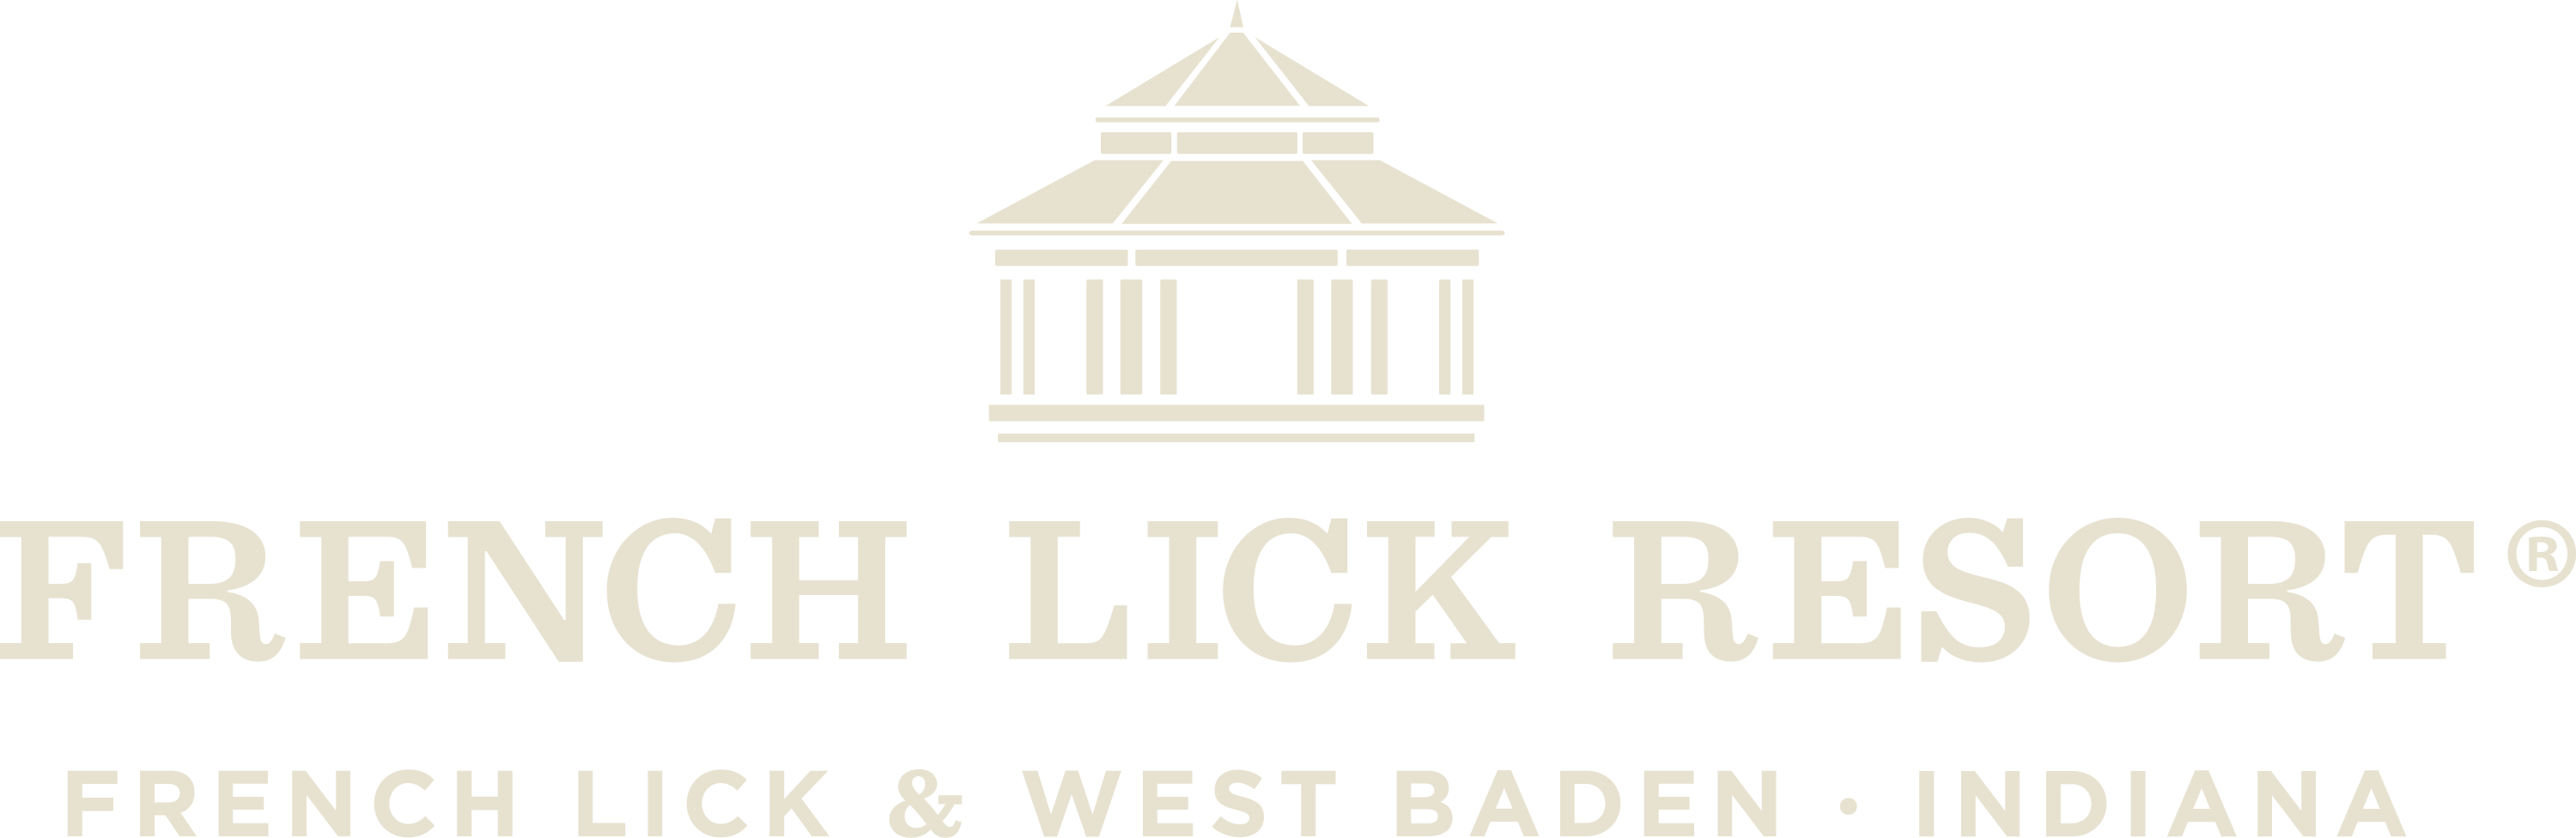 West Indiana Logo - Downloadable Resources. French Lick Resort